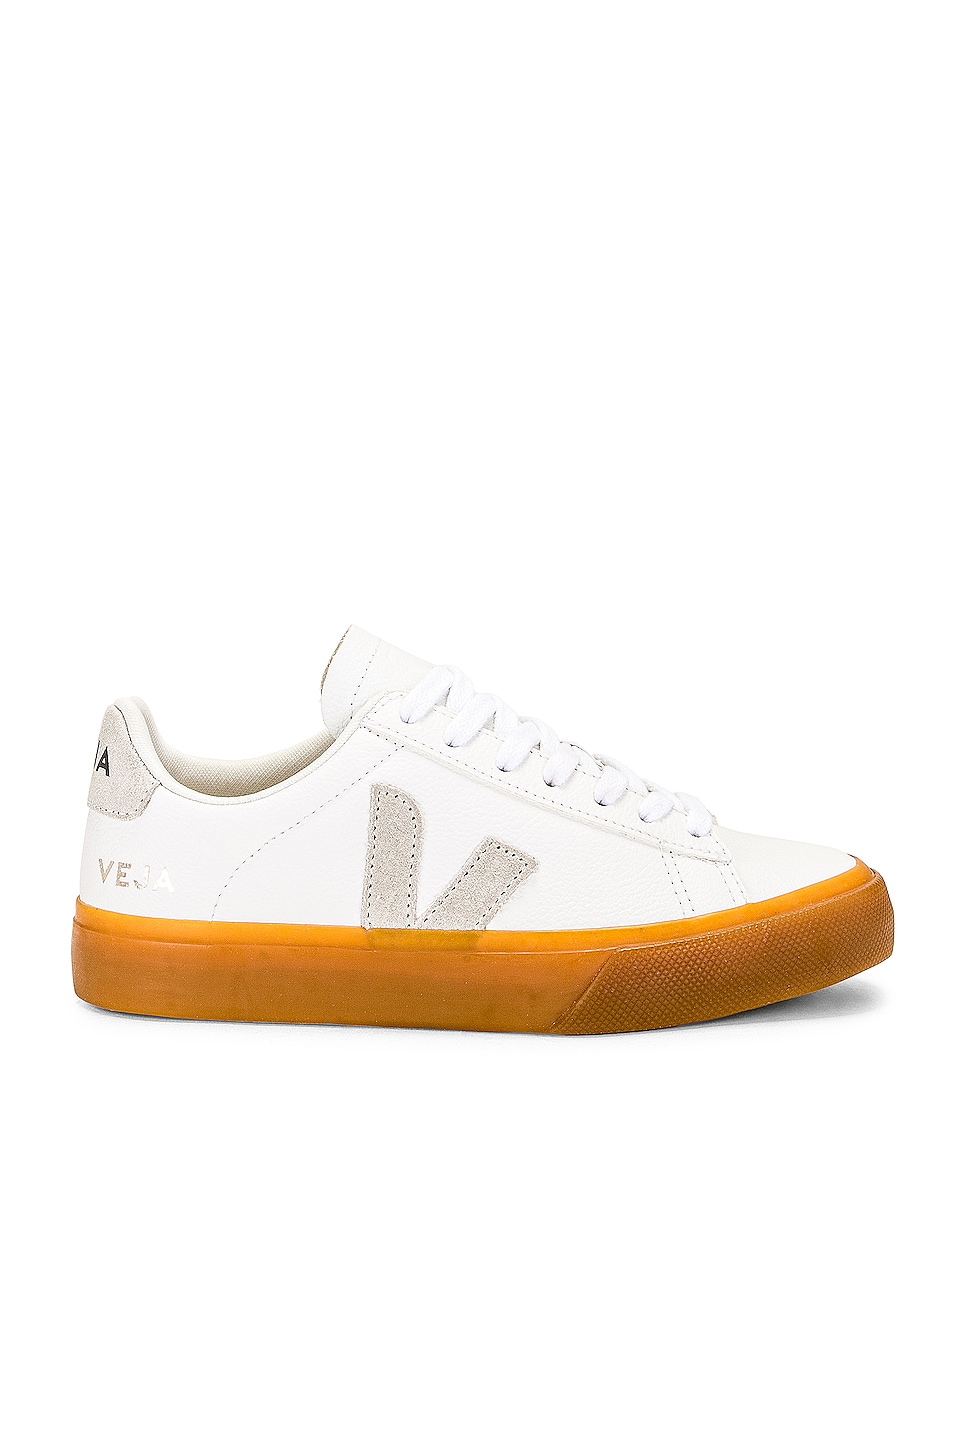 Image 1 of Veja Campo Sneaker in Extra White, Natural, & Natural